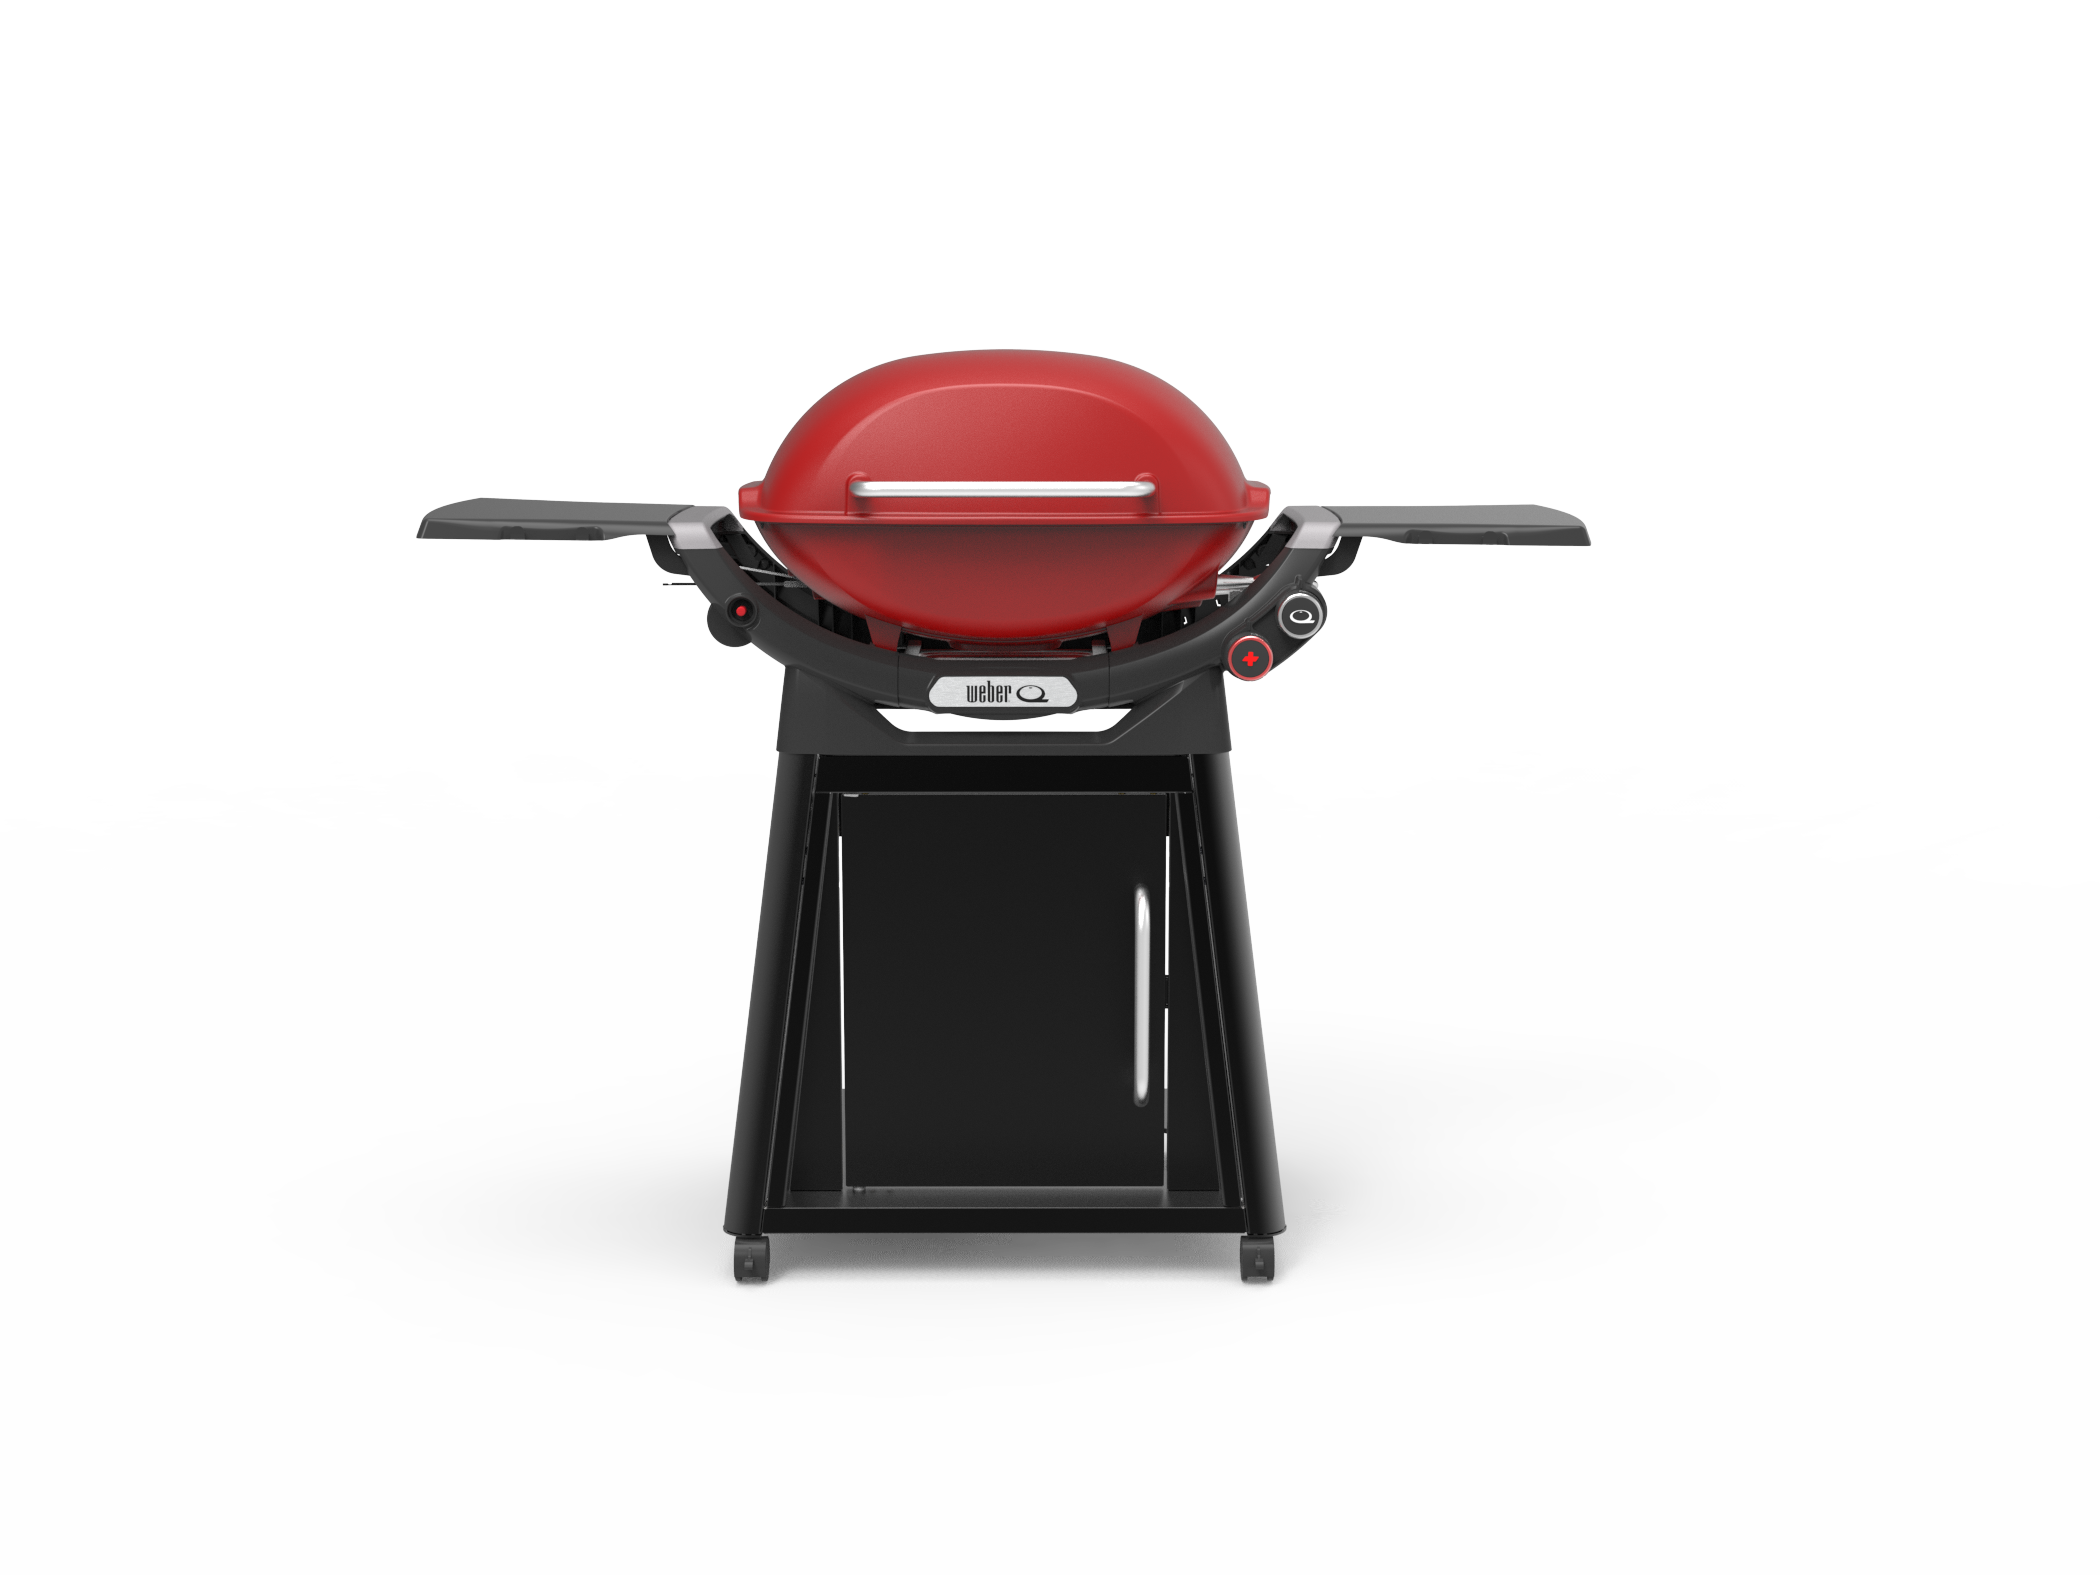 Weber Q 3100 N plus front view in flame red